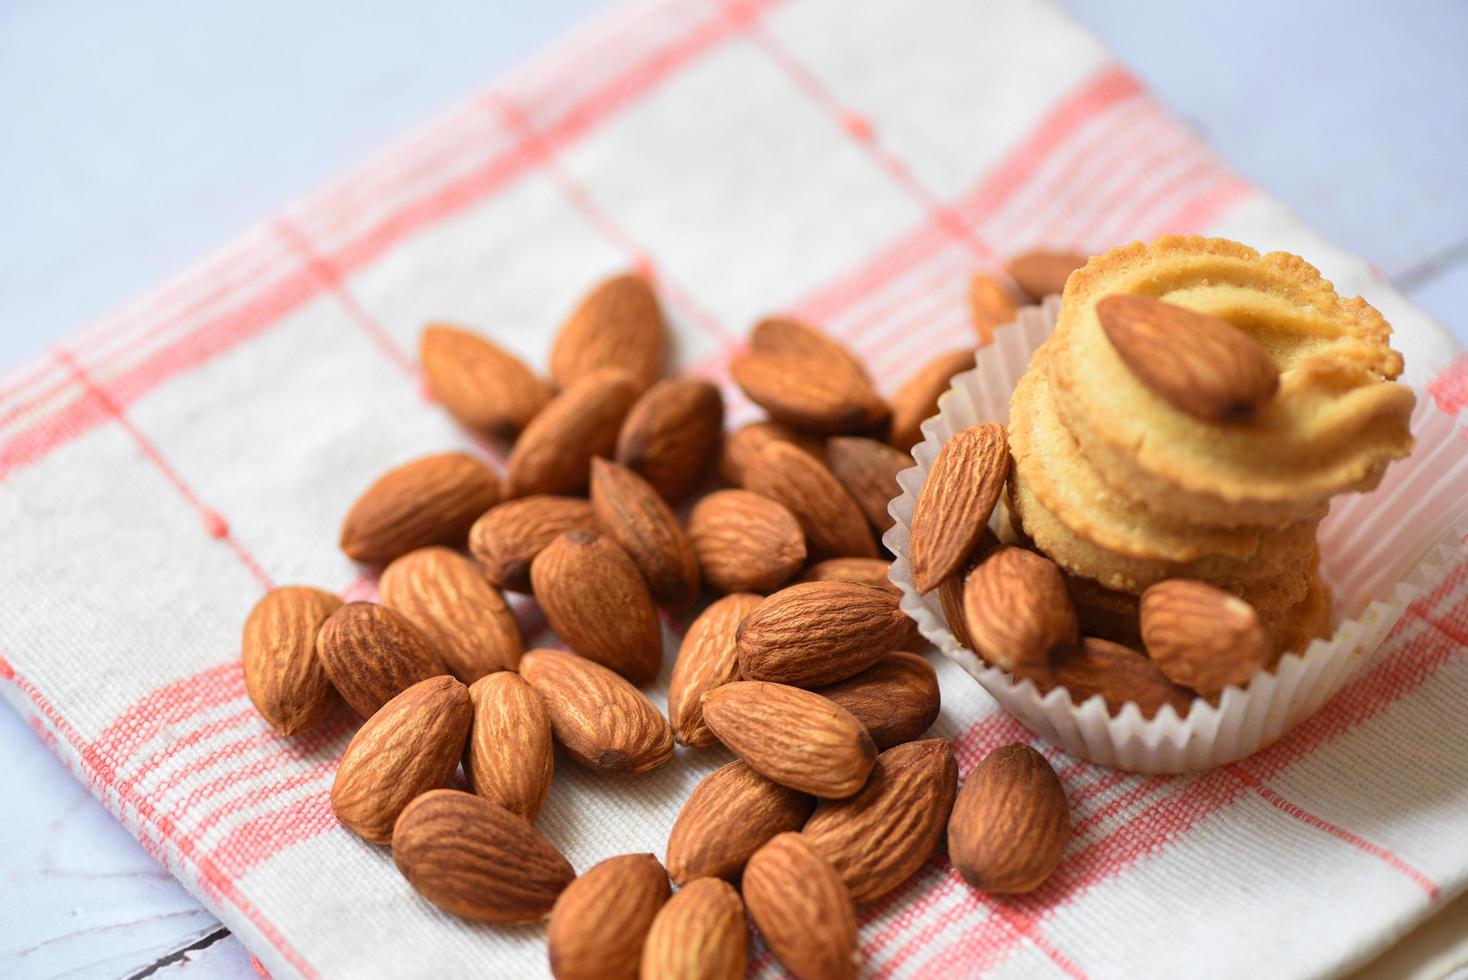 Almonds nuts on table cloths background - almond cookie for breakfast health food photo